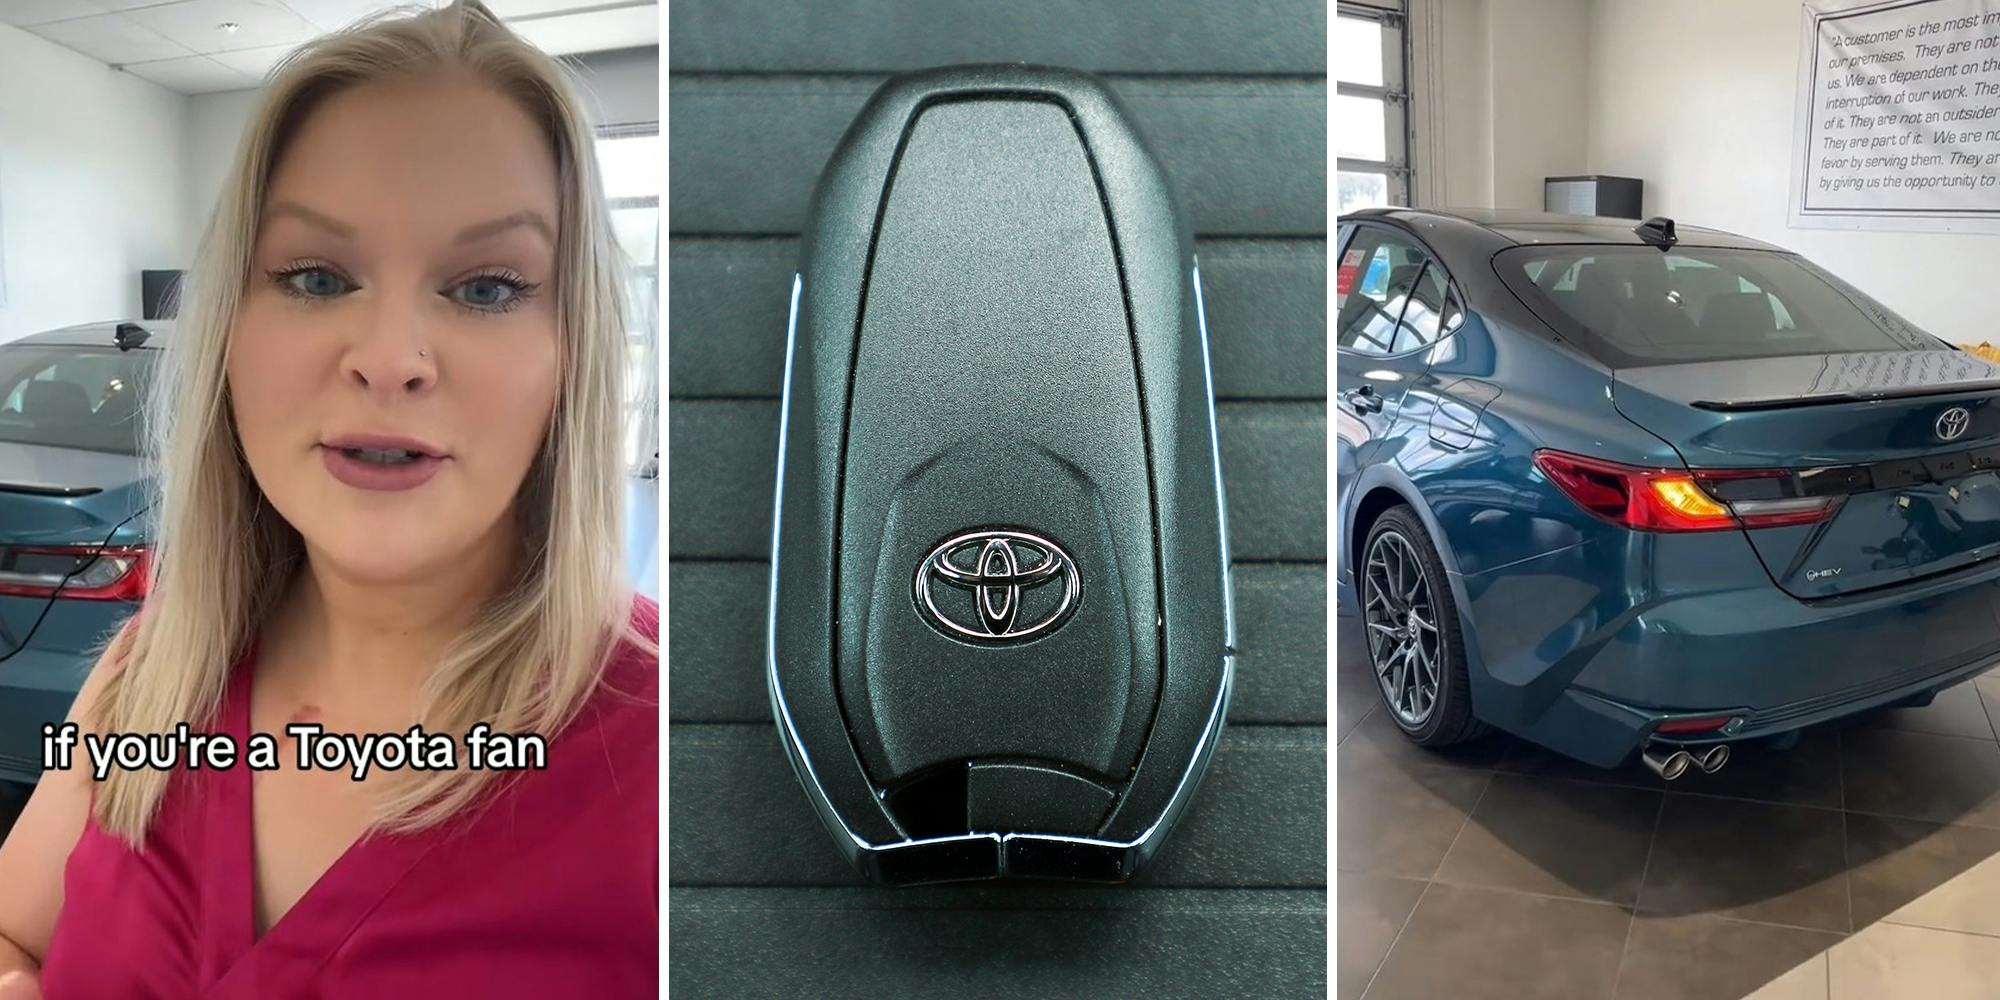 ‘I tested it out’: Toyota employee shows automaker changed the controversial remote start feature